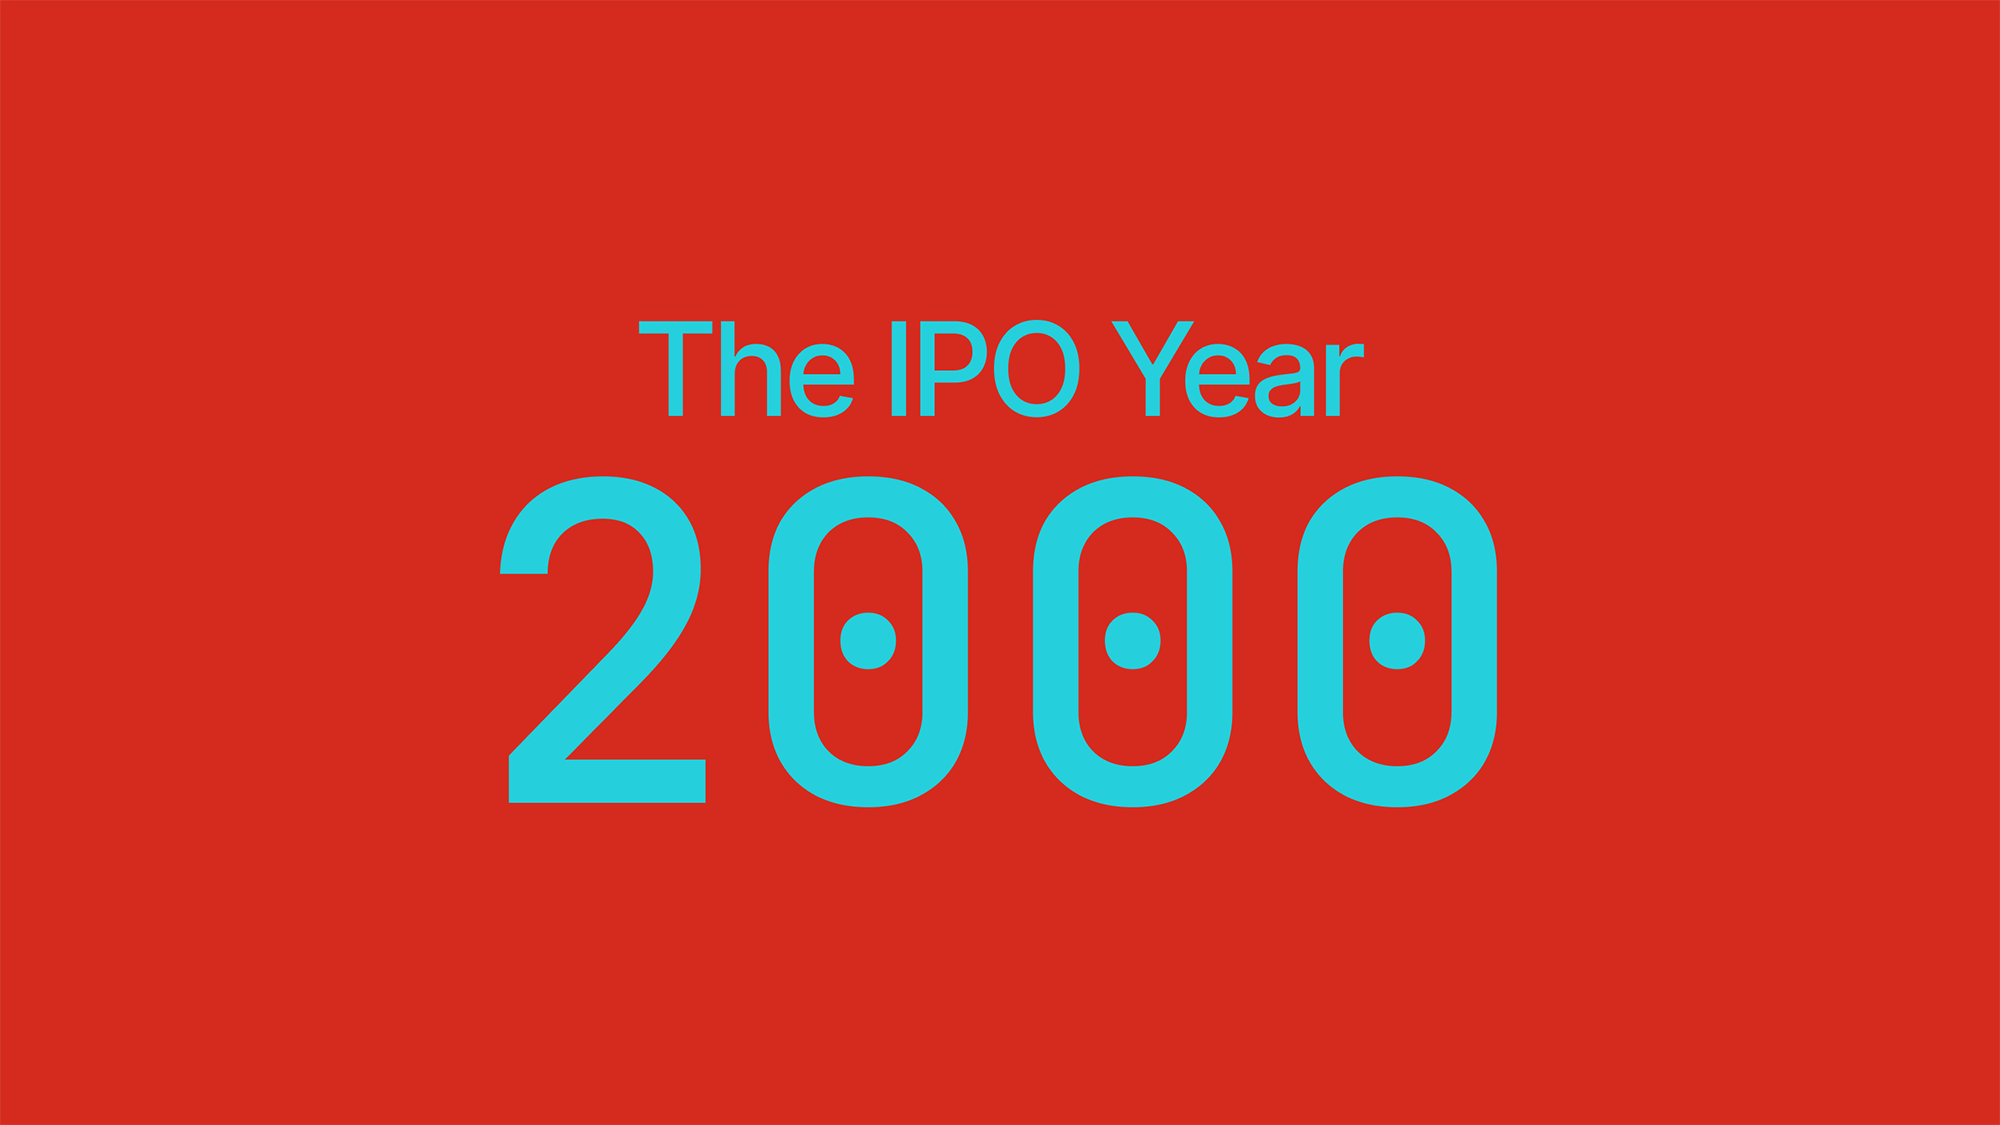 Discover the IPO year of 2000